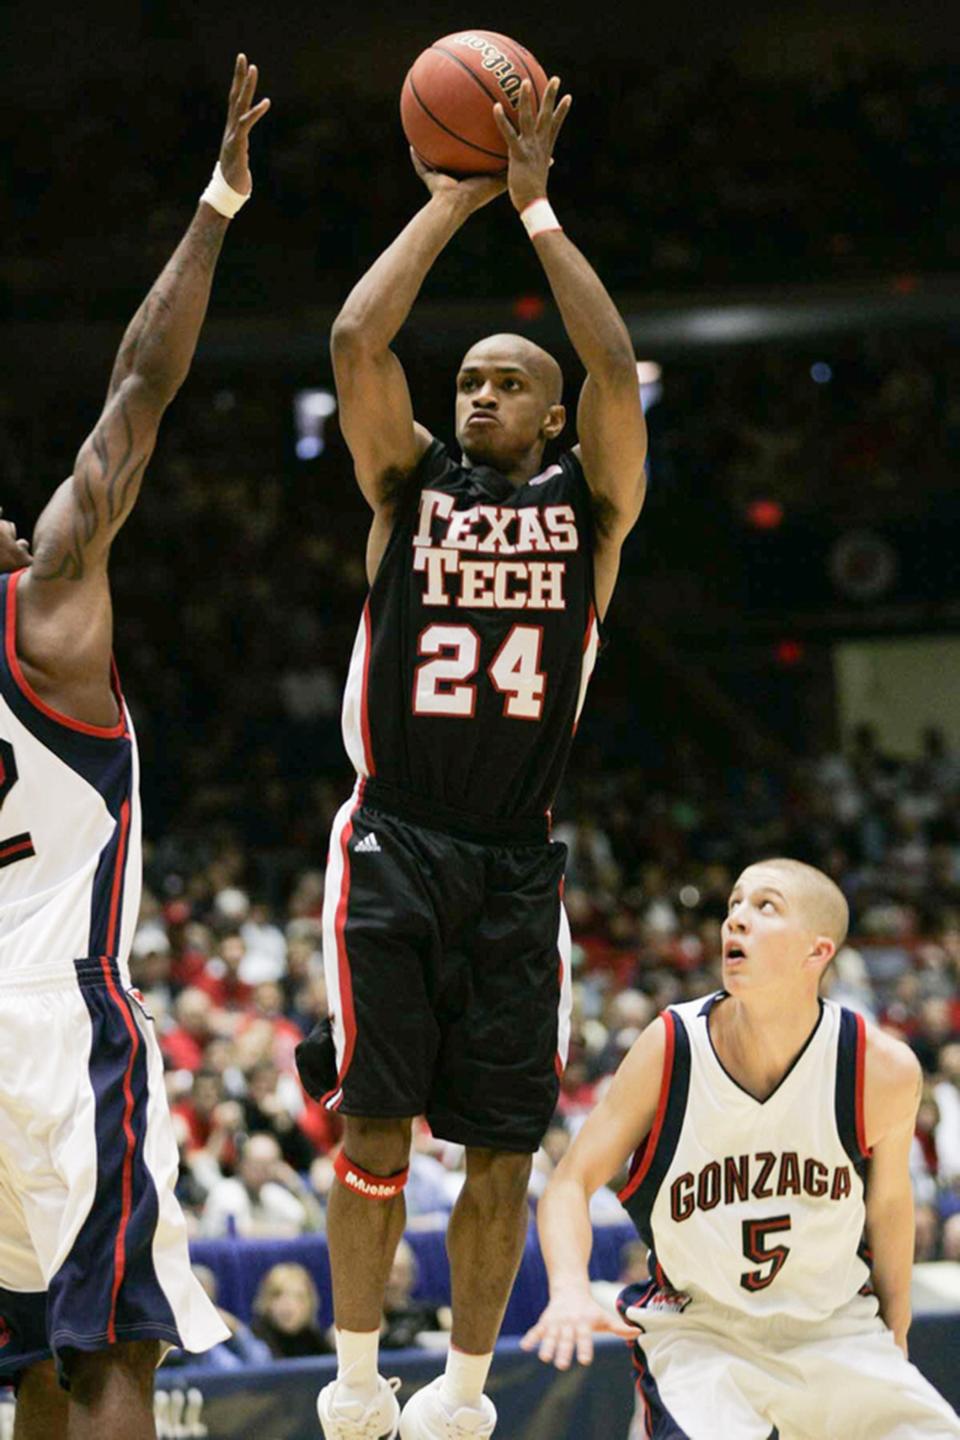 Ronald Ross, who led Texas Tech to the NCAA Tournament round of 16 in 2005, is one of six former athletes scheduled for induction Friday into the Tech Hall of Fame.